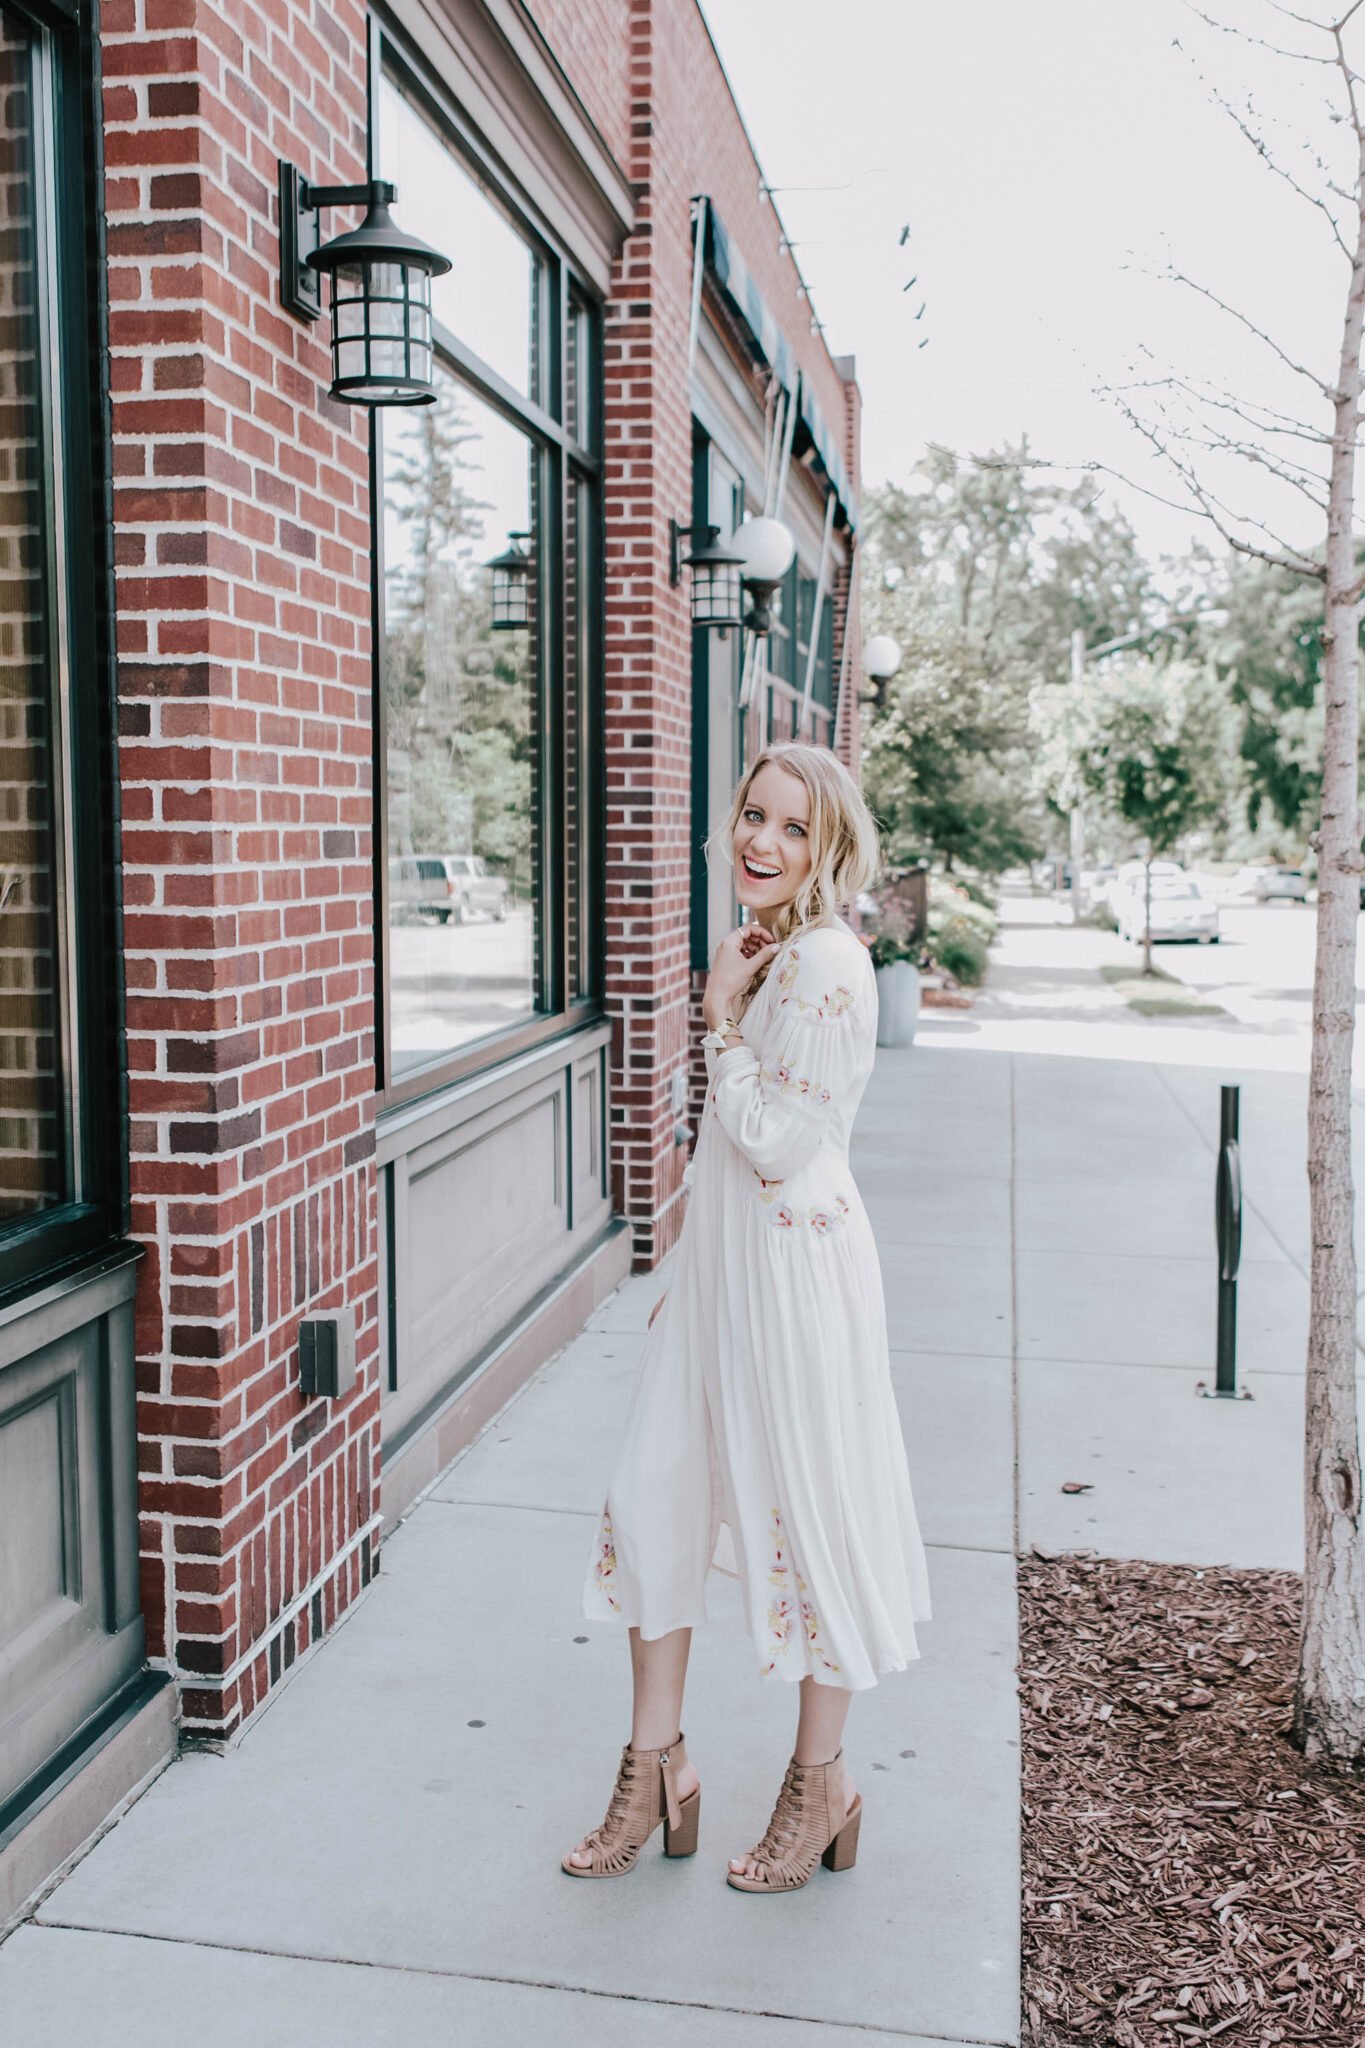 white free people dress - 5 tips for self care